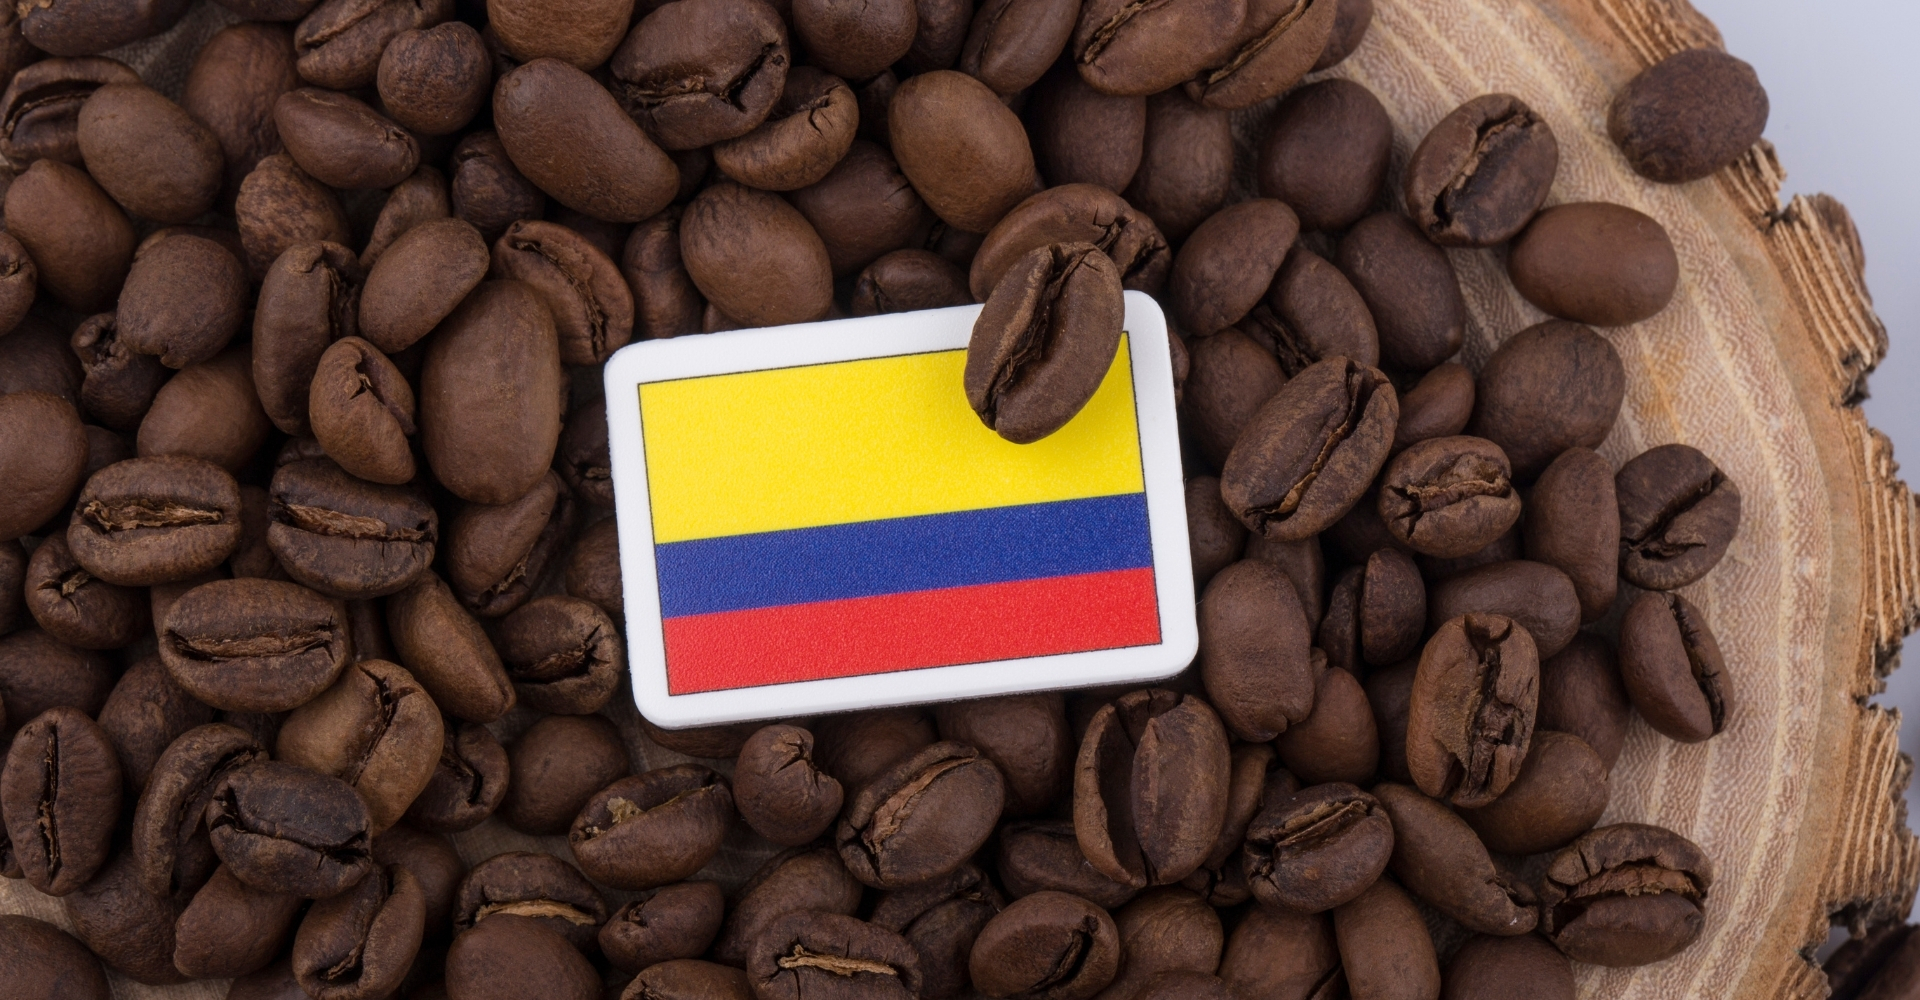 Coffe beans background with the colombian flag